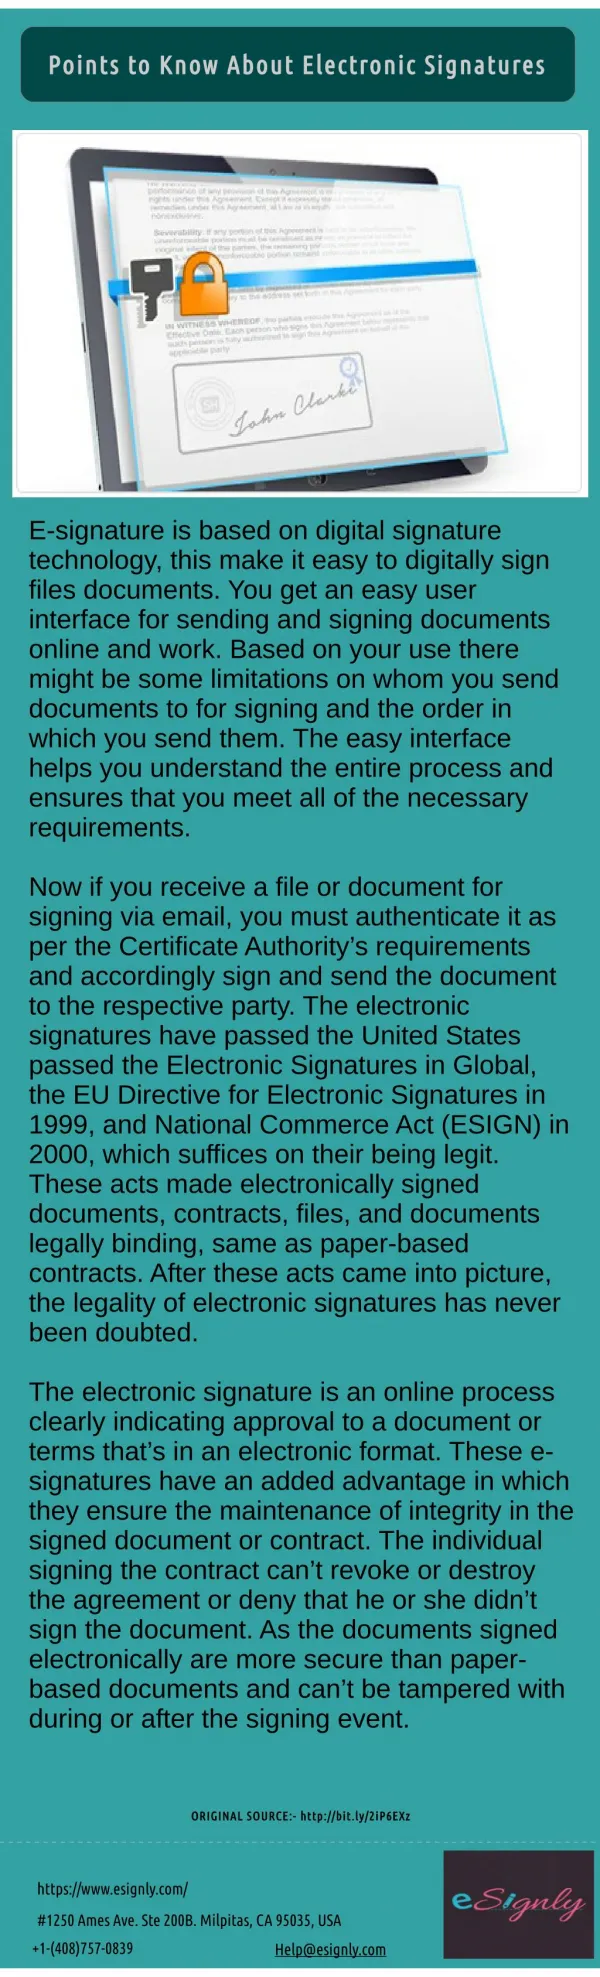 Basic Things About e-Signatures